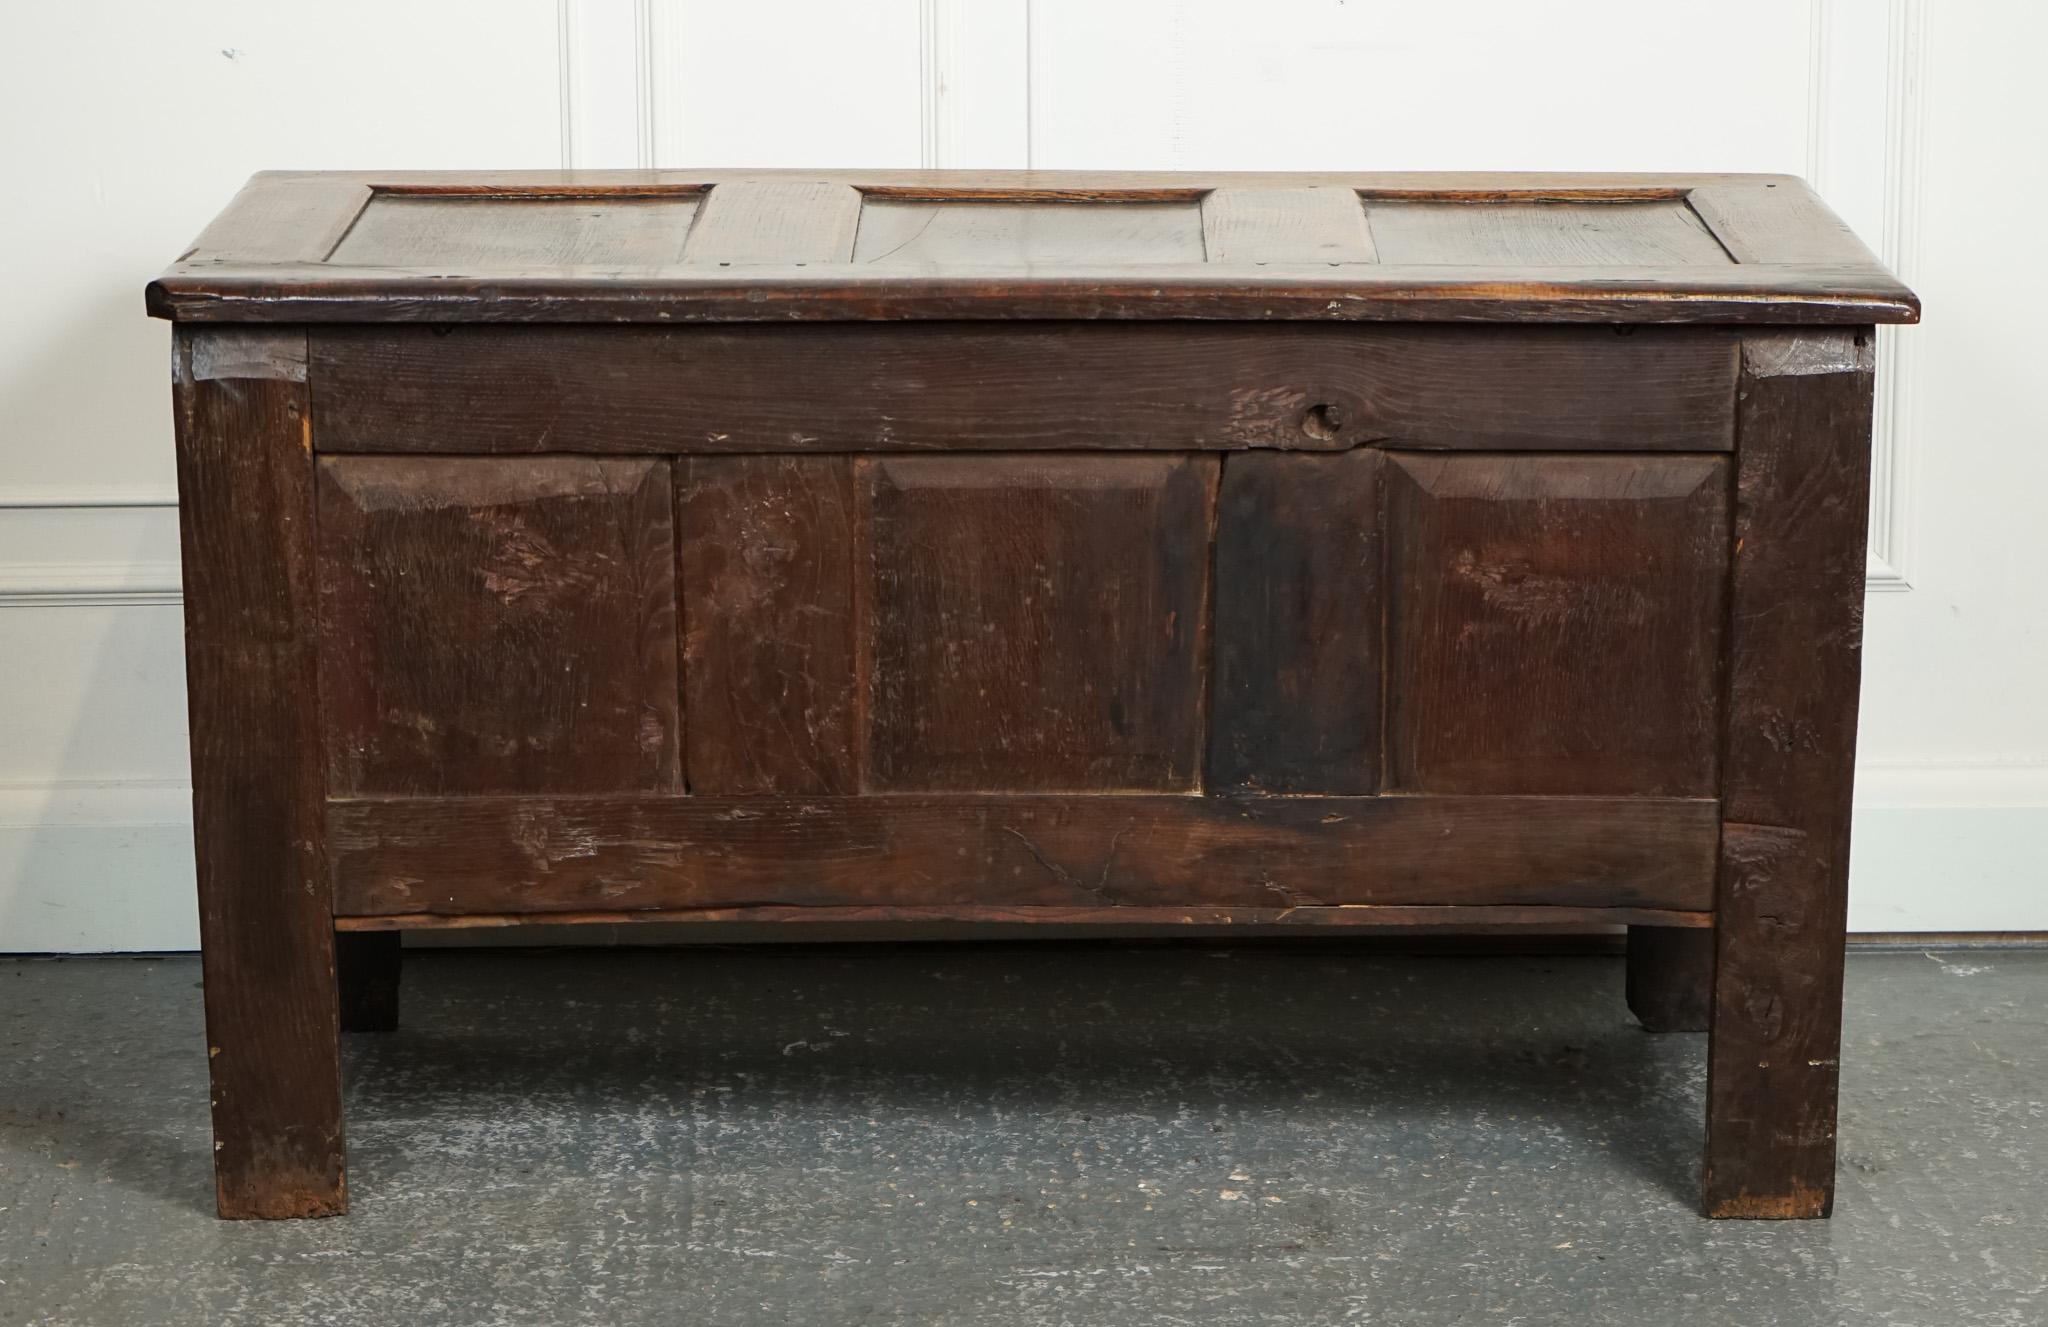 LOVELY 17TH CENTURY CARVED ANTIQUE OAK TRUNK CHEST COFFER j1 For Sale 13